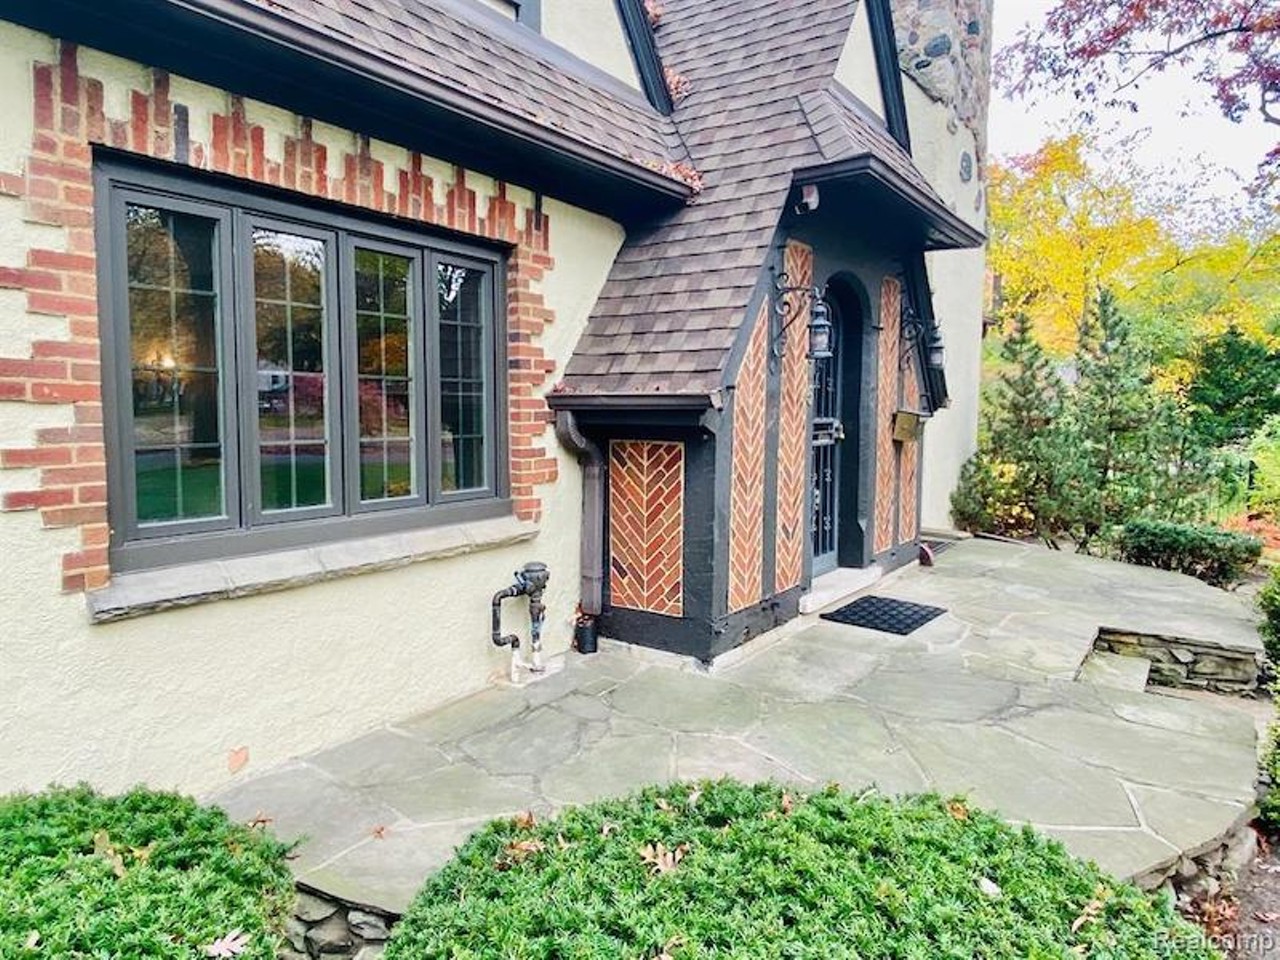 This Royal Oak house is straight out of a fairy tale